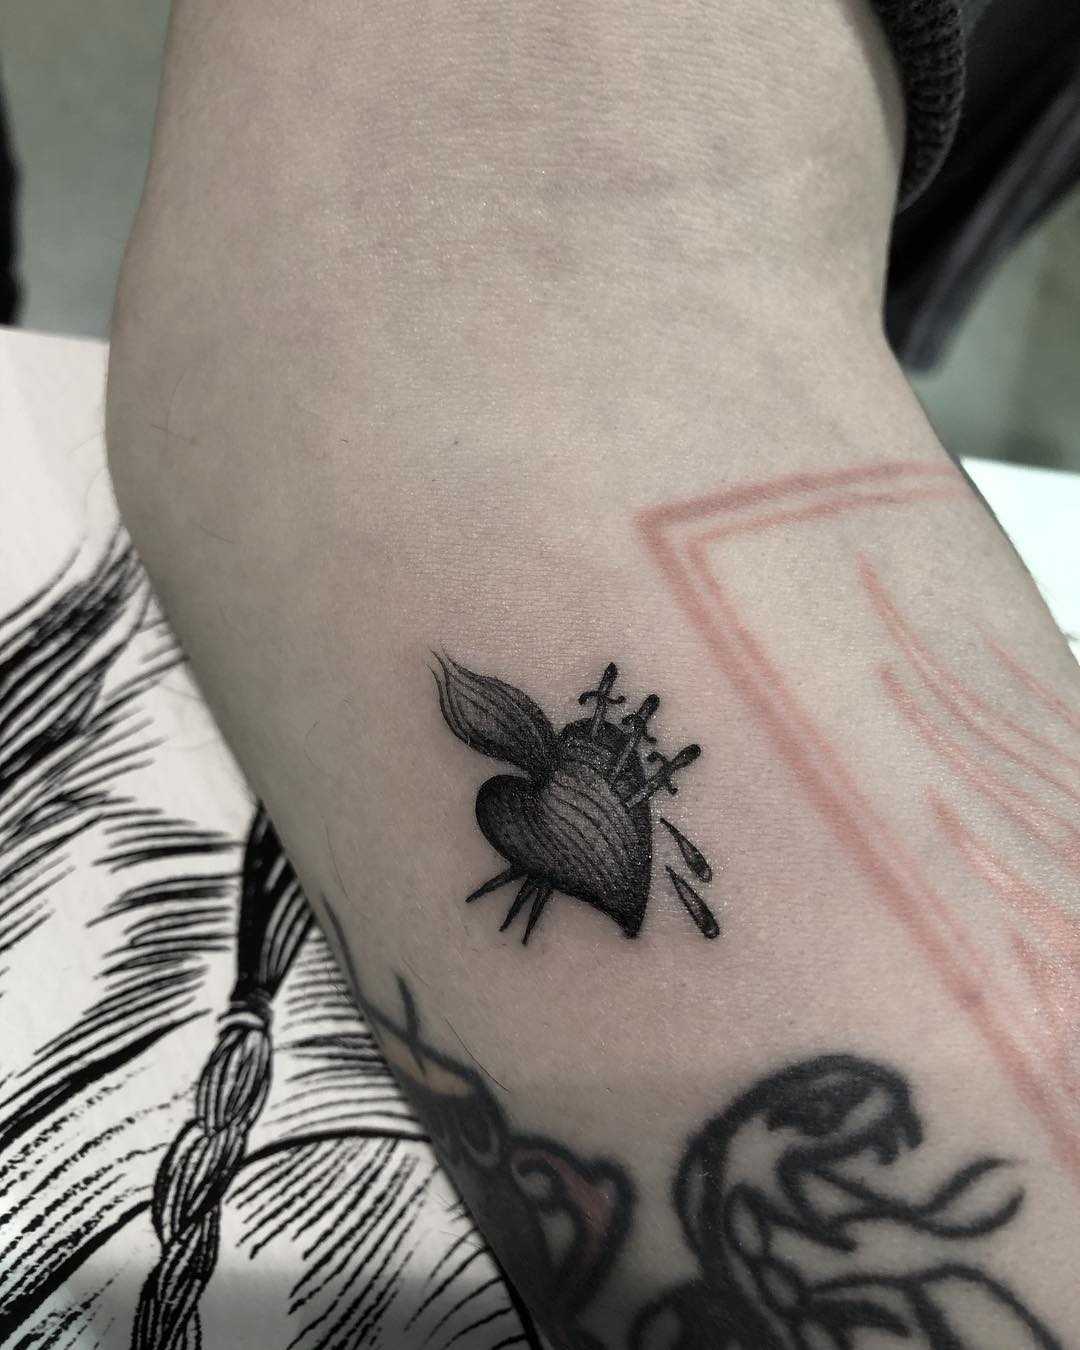 Little sacred heart tattoo by Tine DeFiore